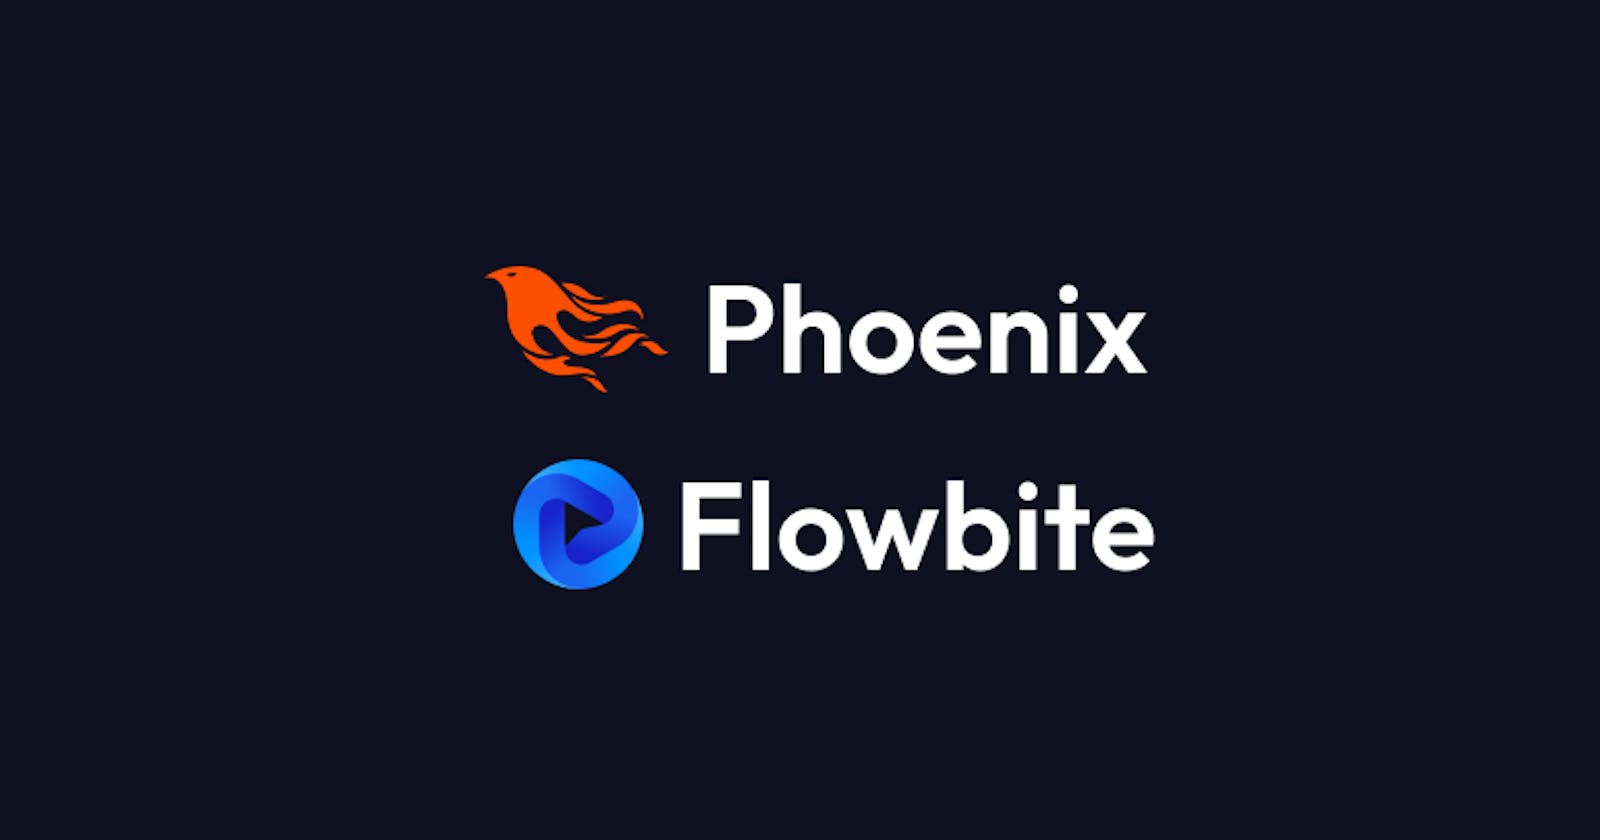 How to install Phoenix (Elixir) with Tailwind CSS and Flowbite